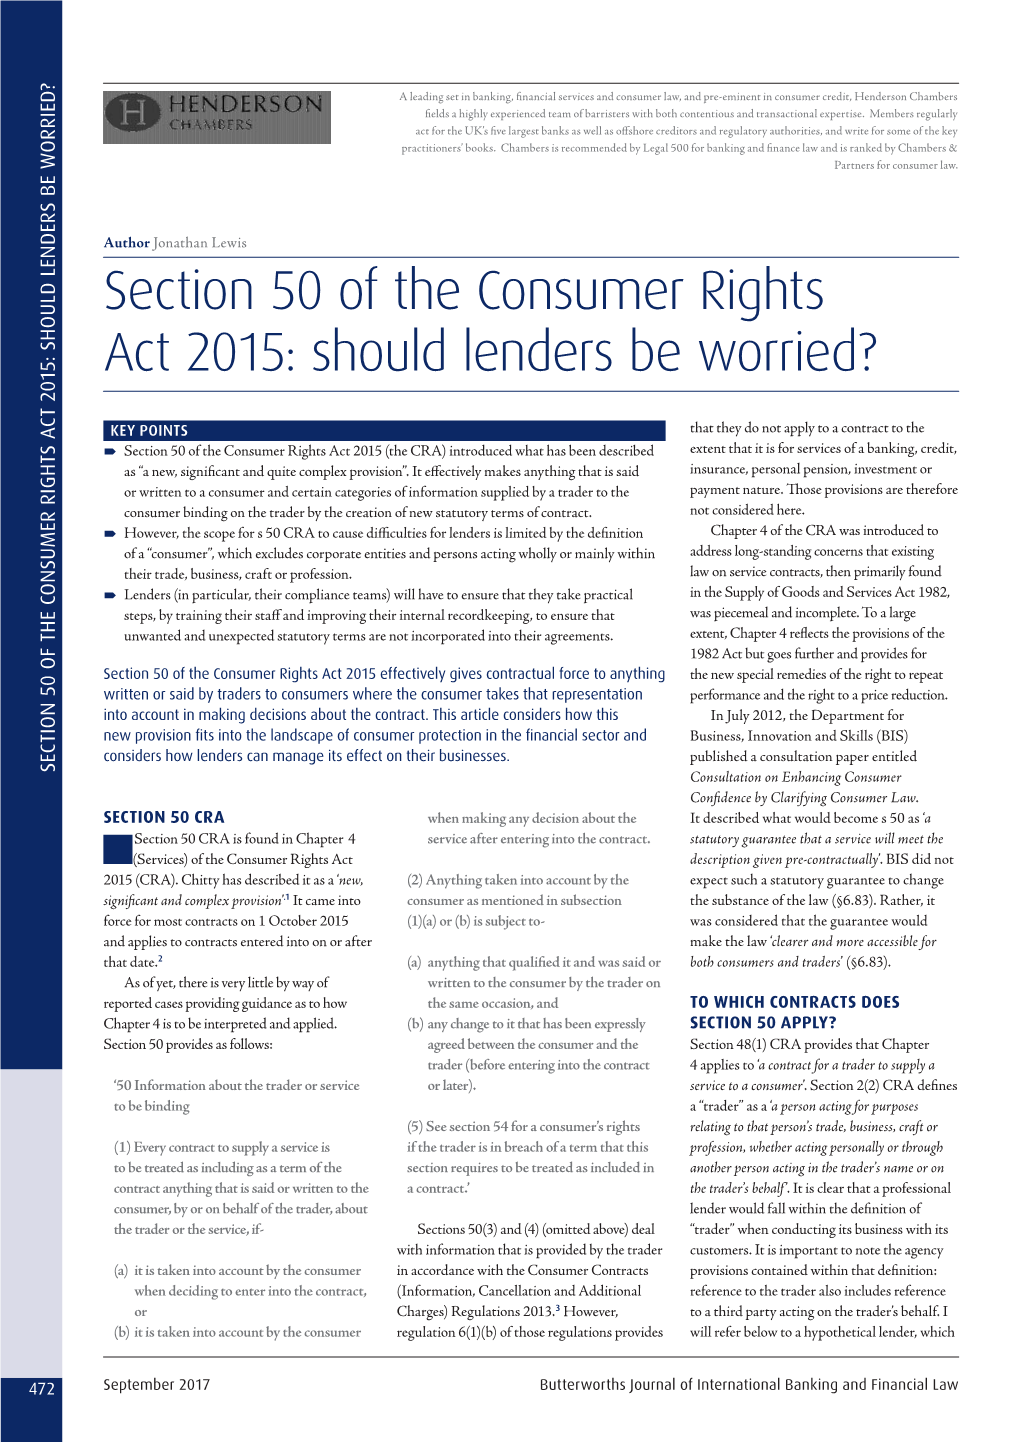 Section 50 of the Consumer Rights Act 2015: Should Lenders Be Worried?